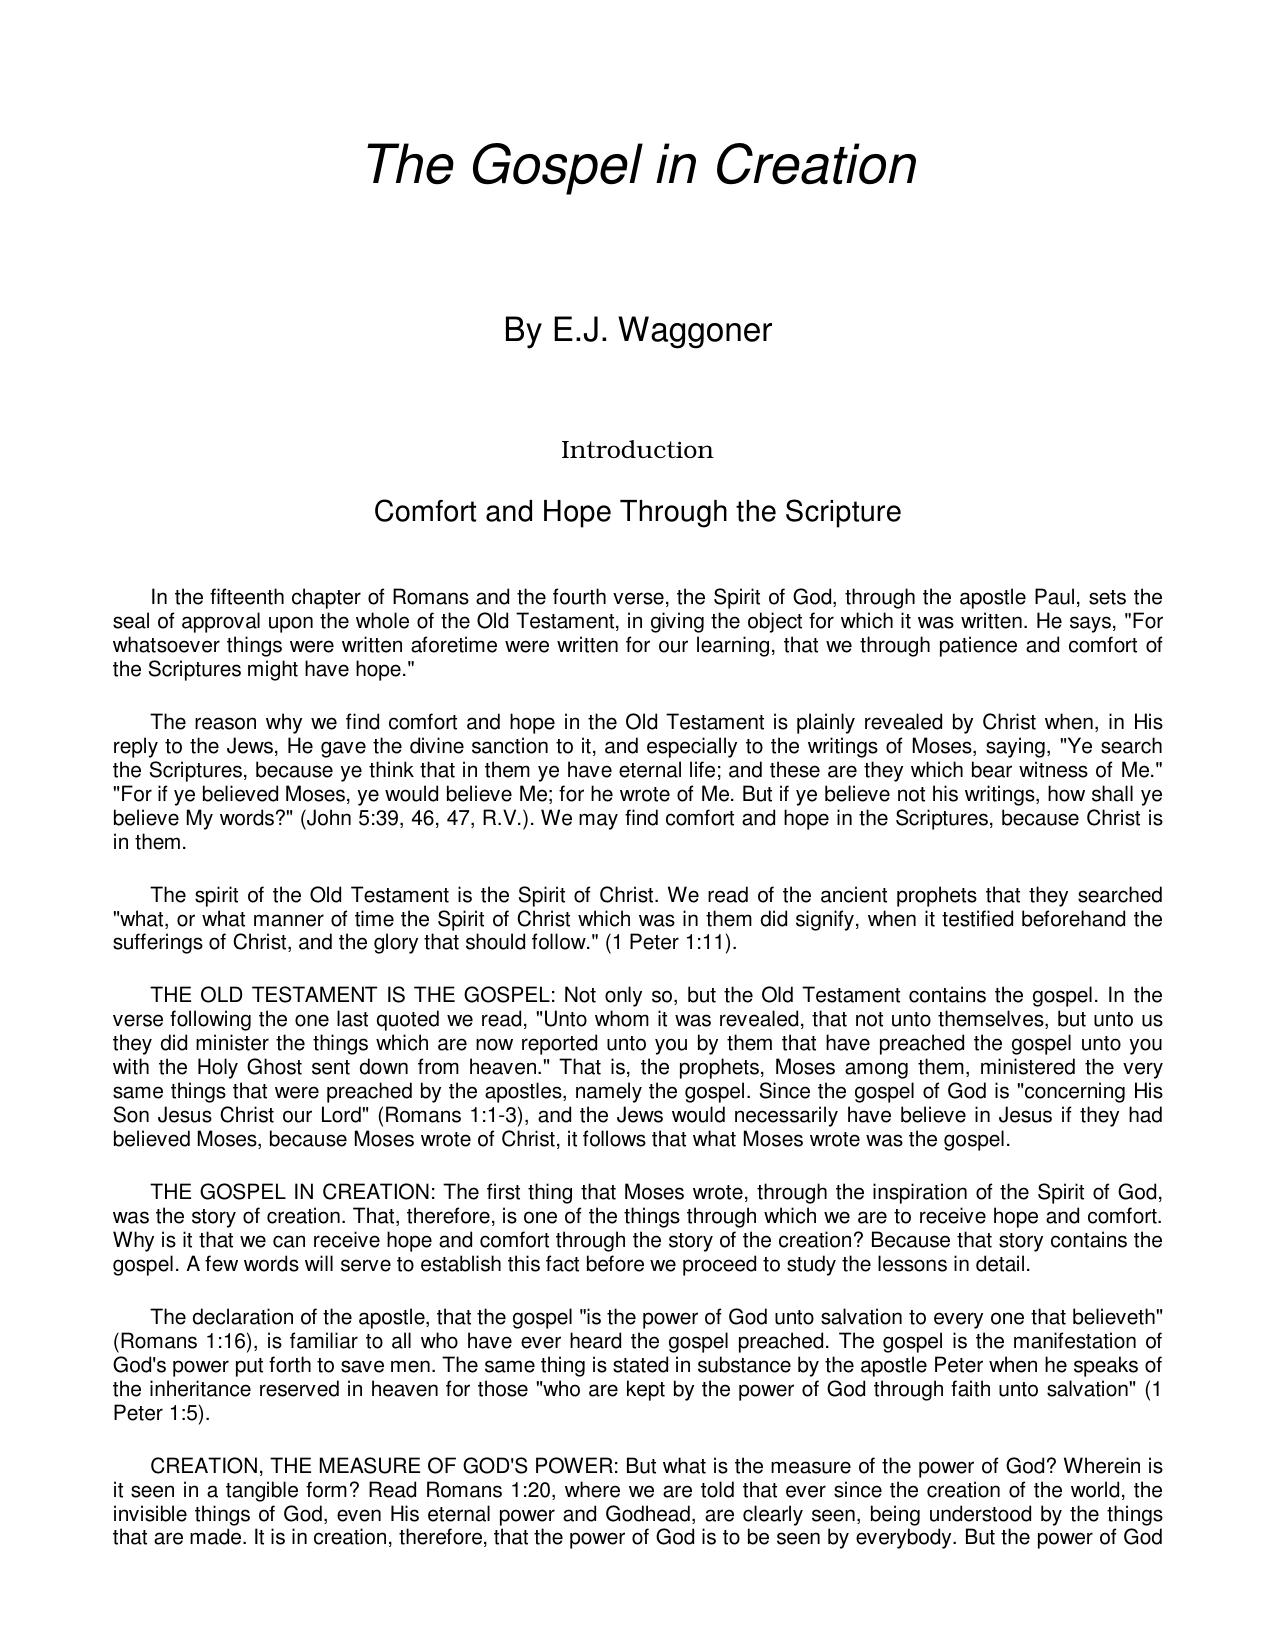 Microsoft Word - Waggoner Gospel in Creation.doc by Unknown